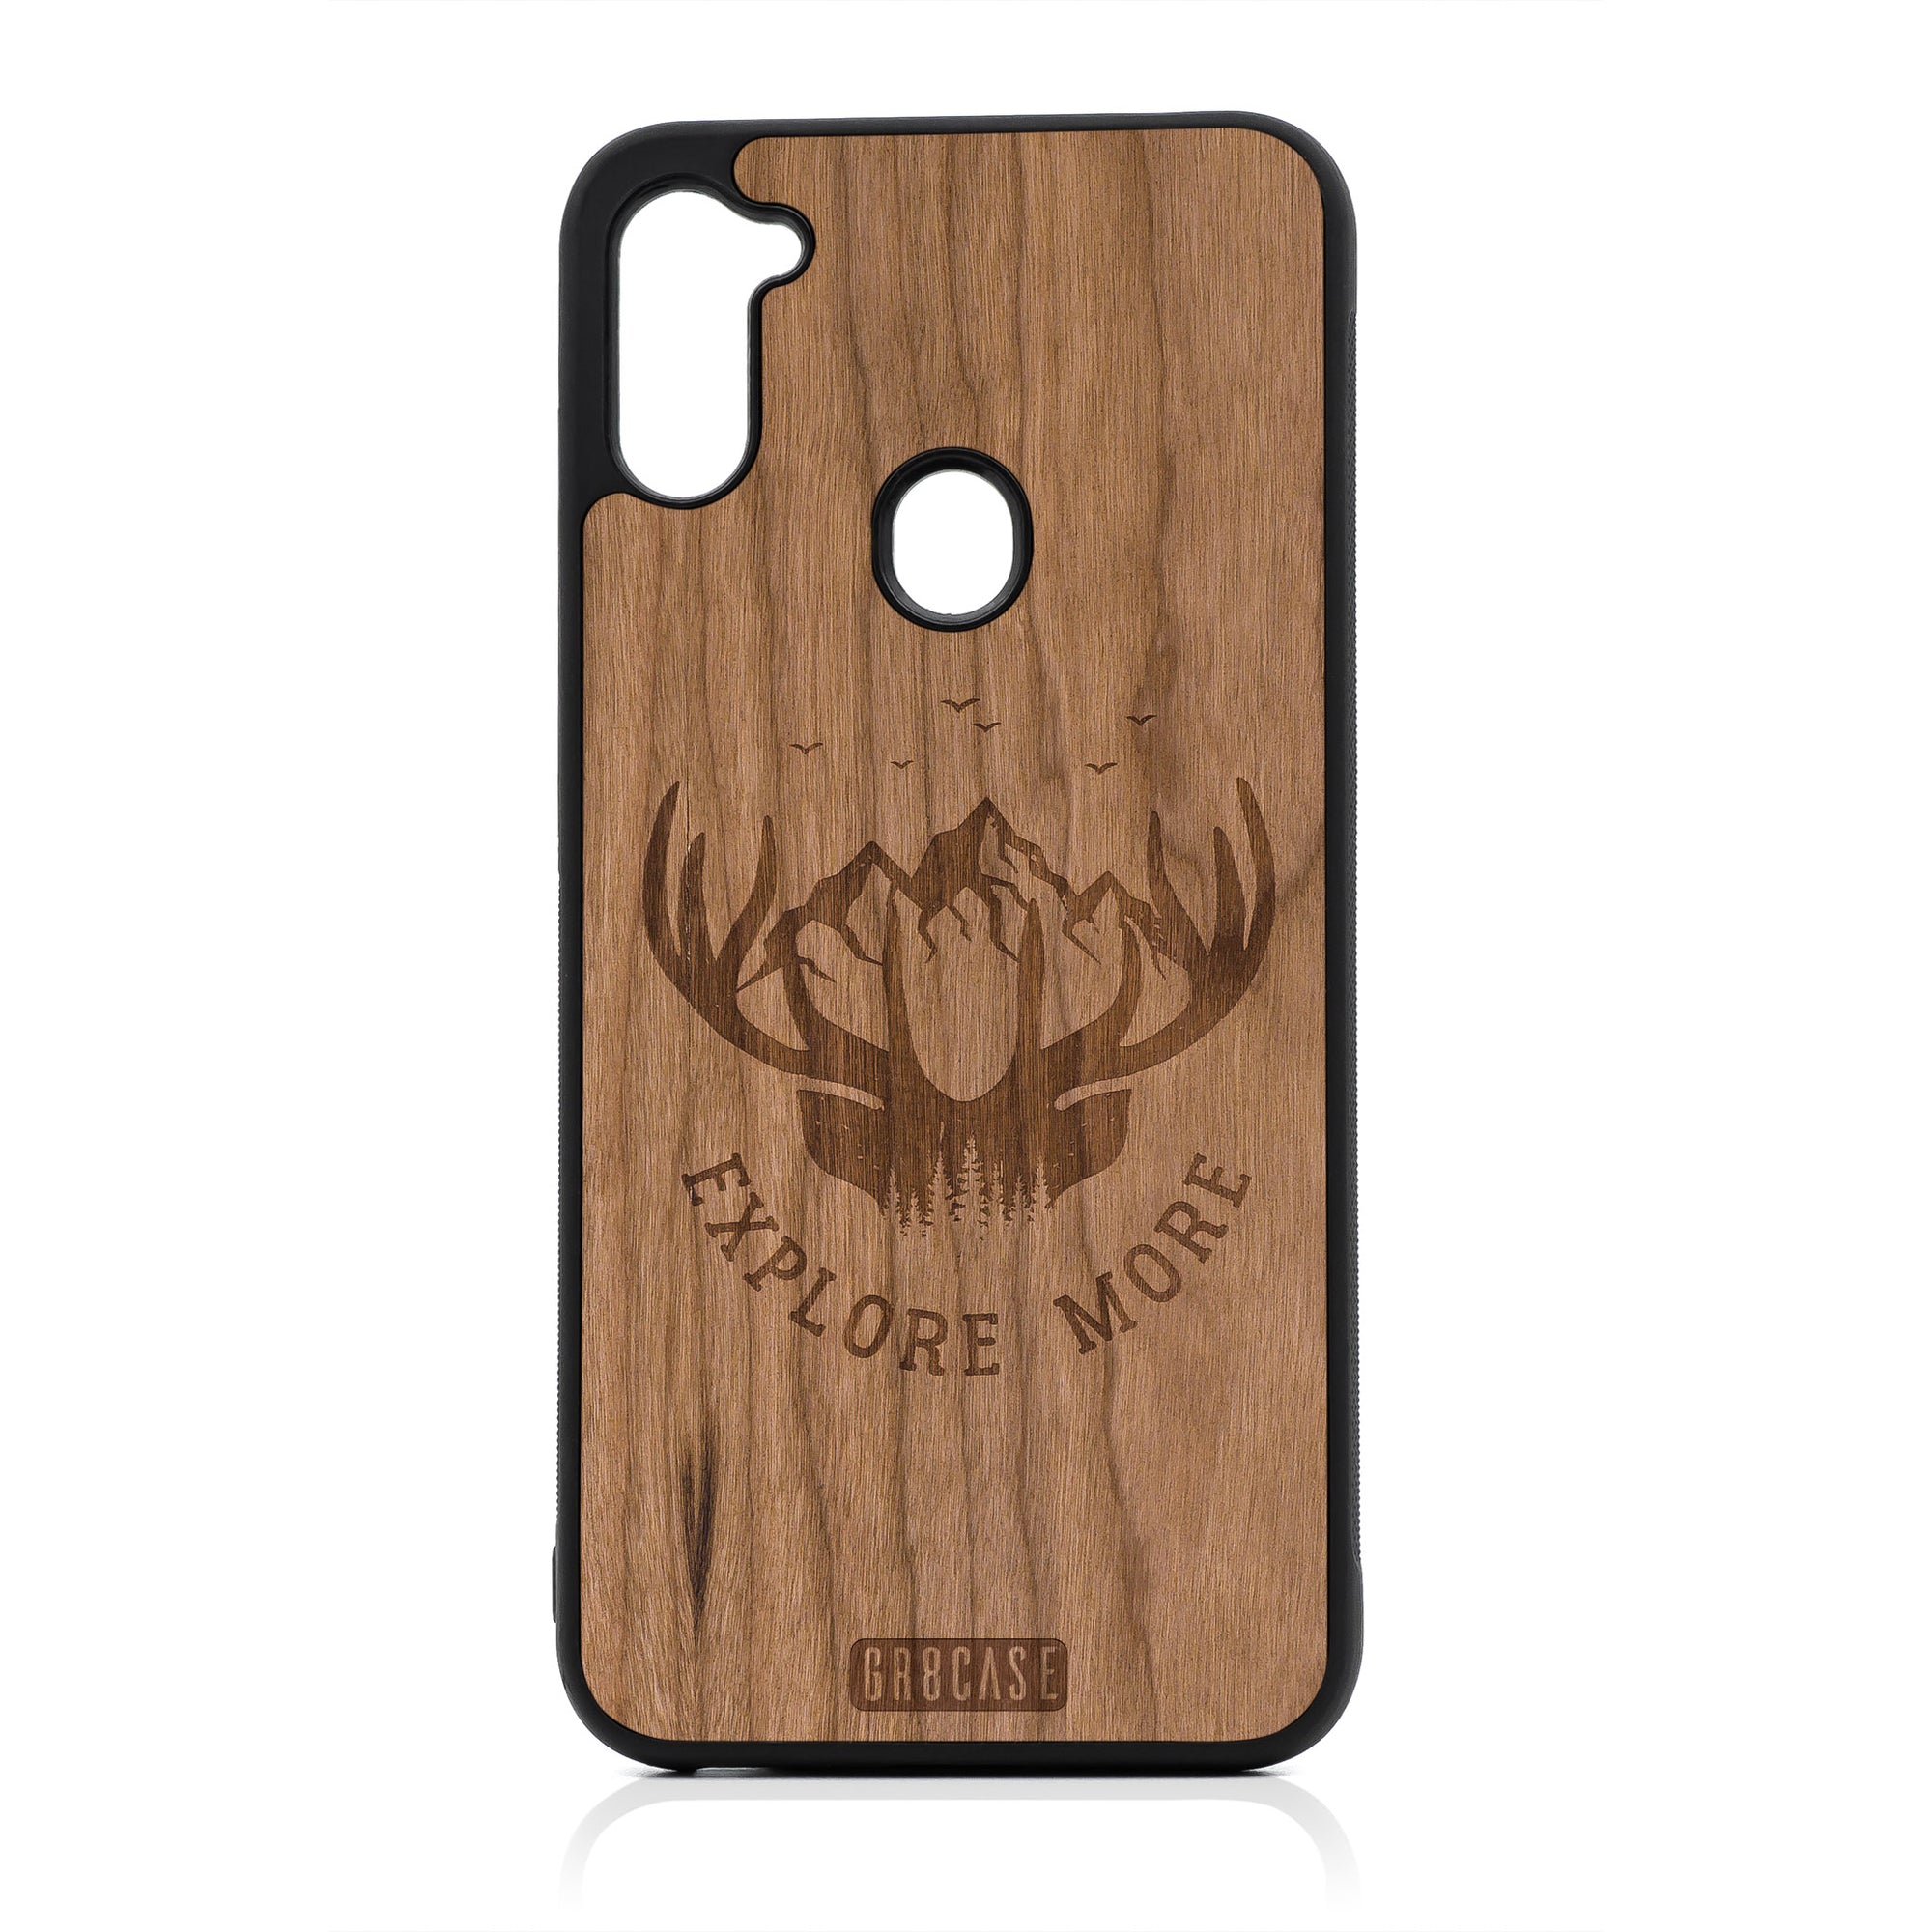 Explore More (Forest, Mountain & Antlers) Design Wood Case For Samsung Galaxy A11